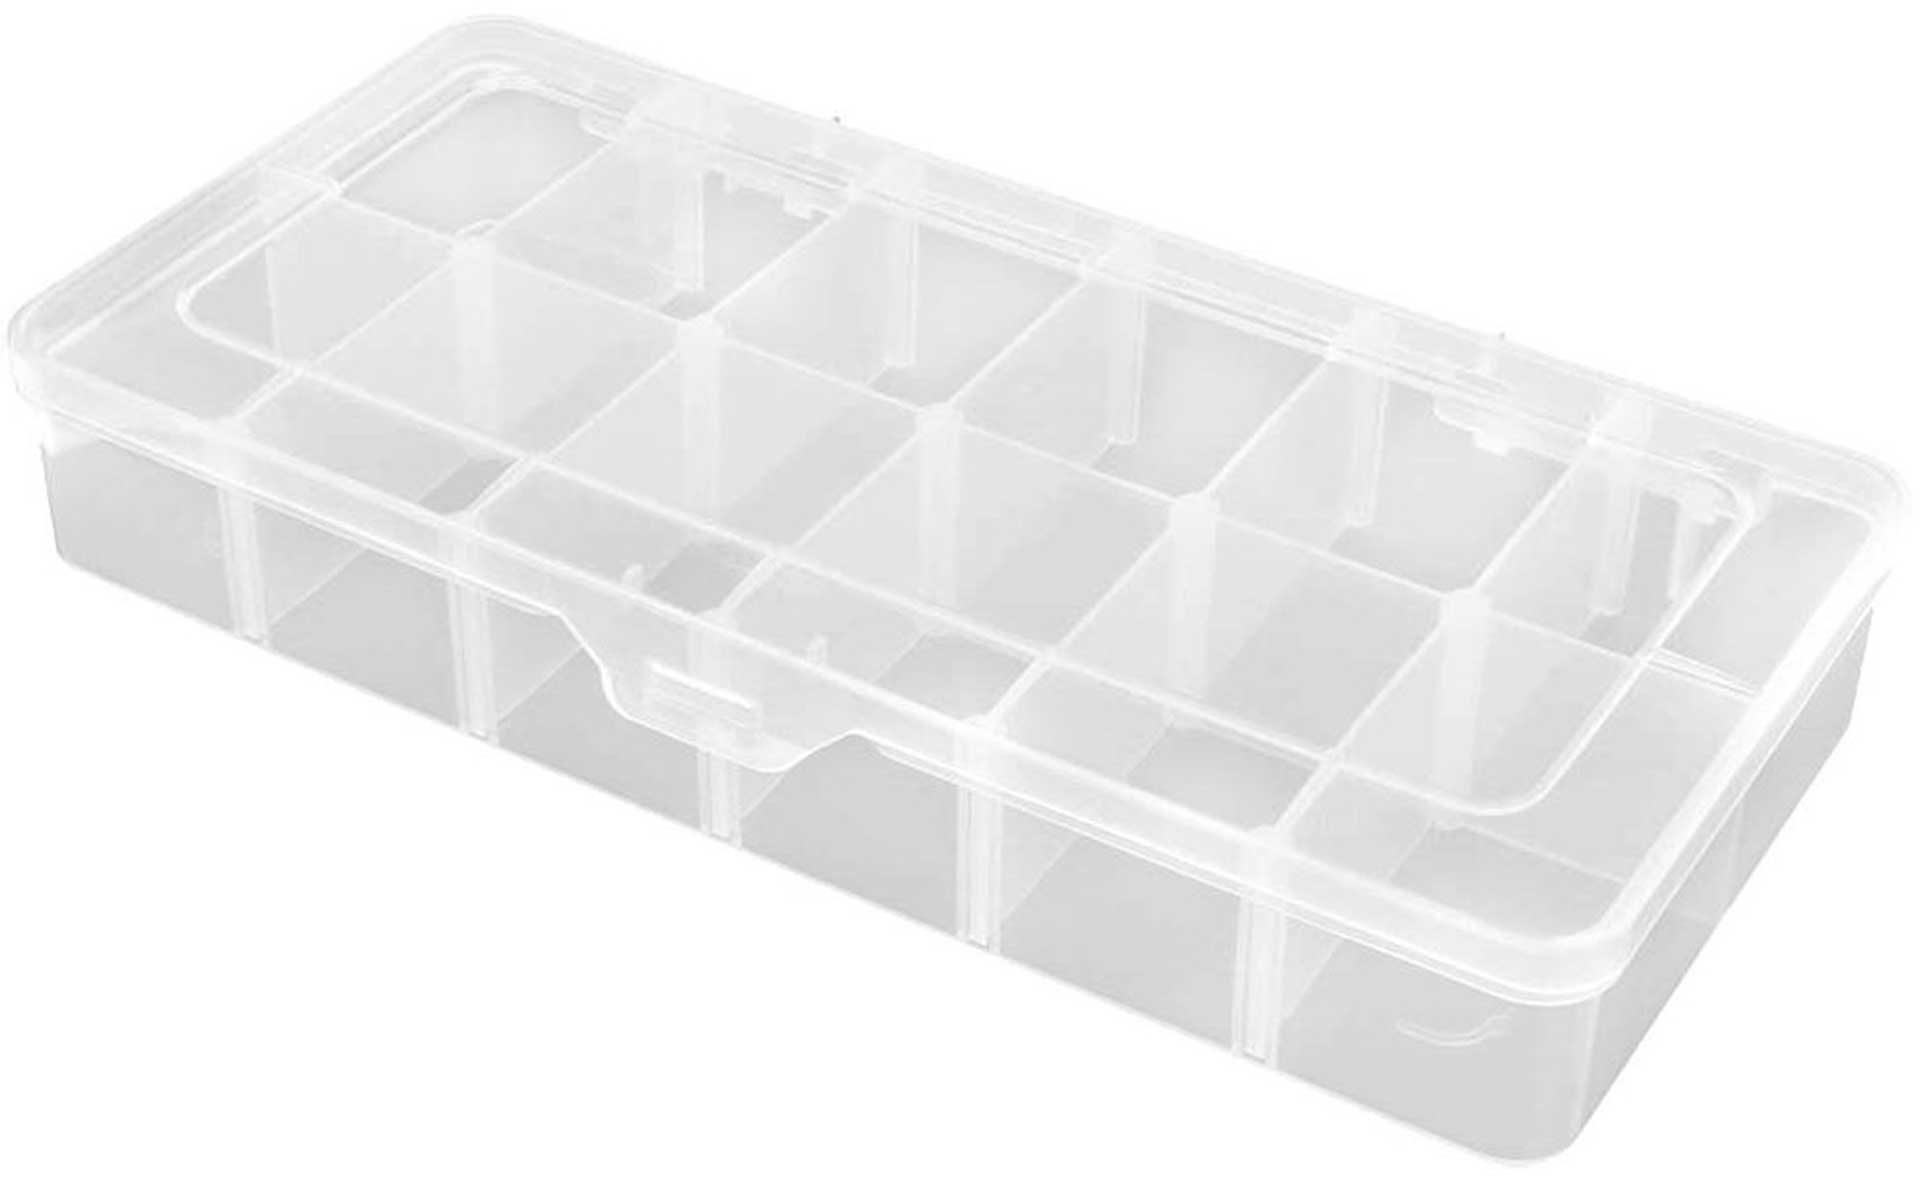 ROBITRONIC SORTIERKASTEN 12 COMPARTMENTS 260X125X43,5MM VARIABLE